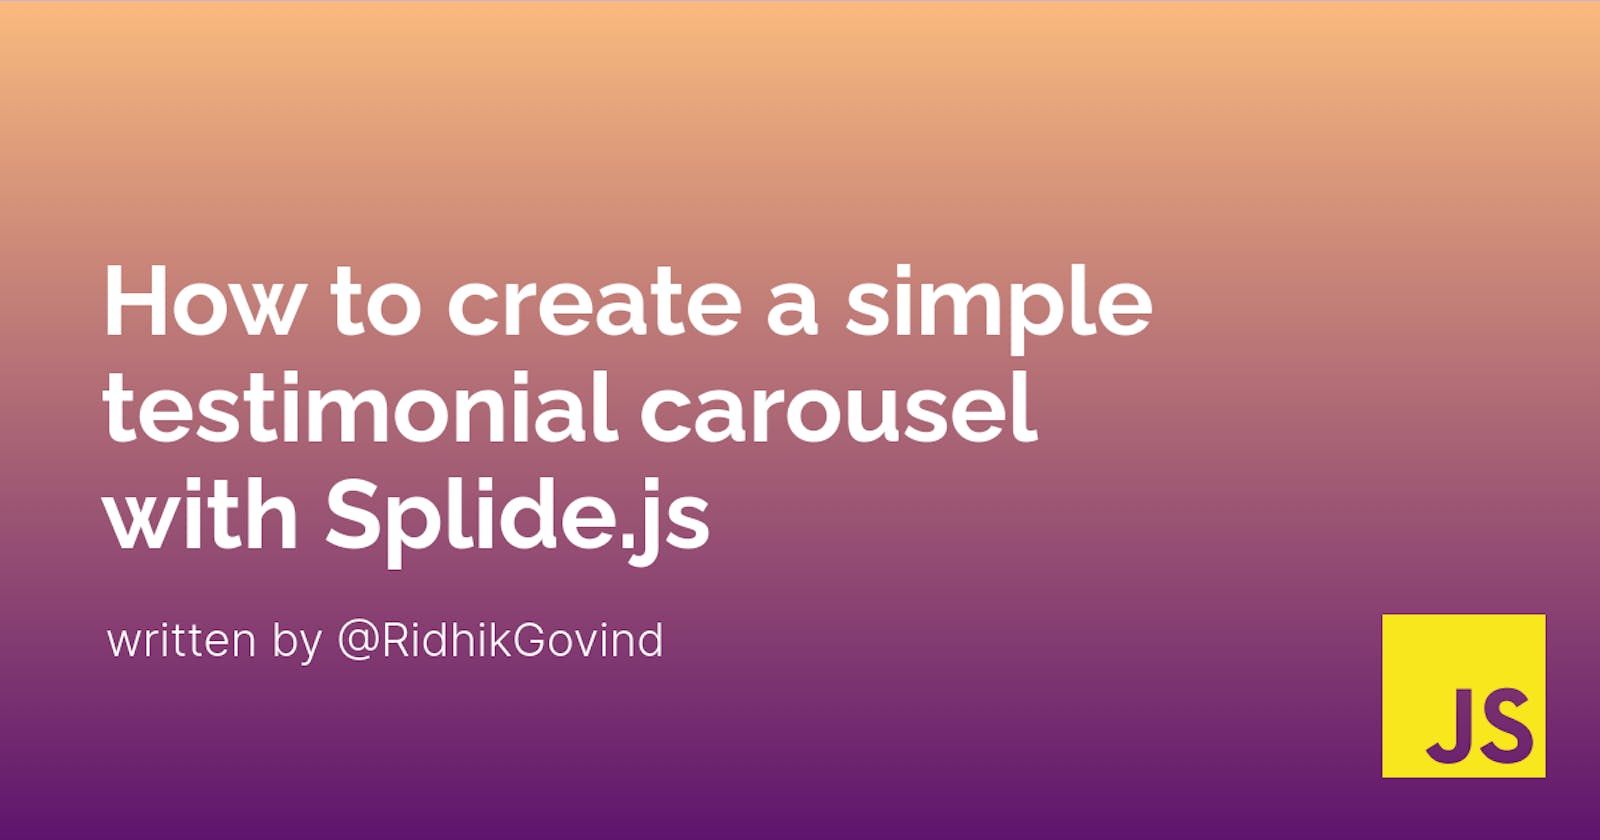 How to create a simple testimonial carousel with Splide.js